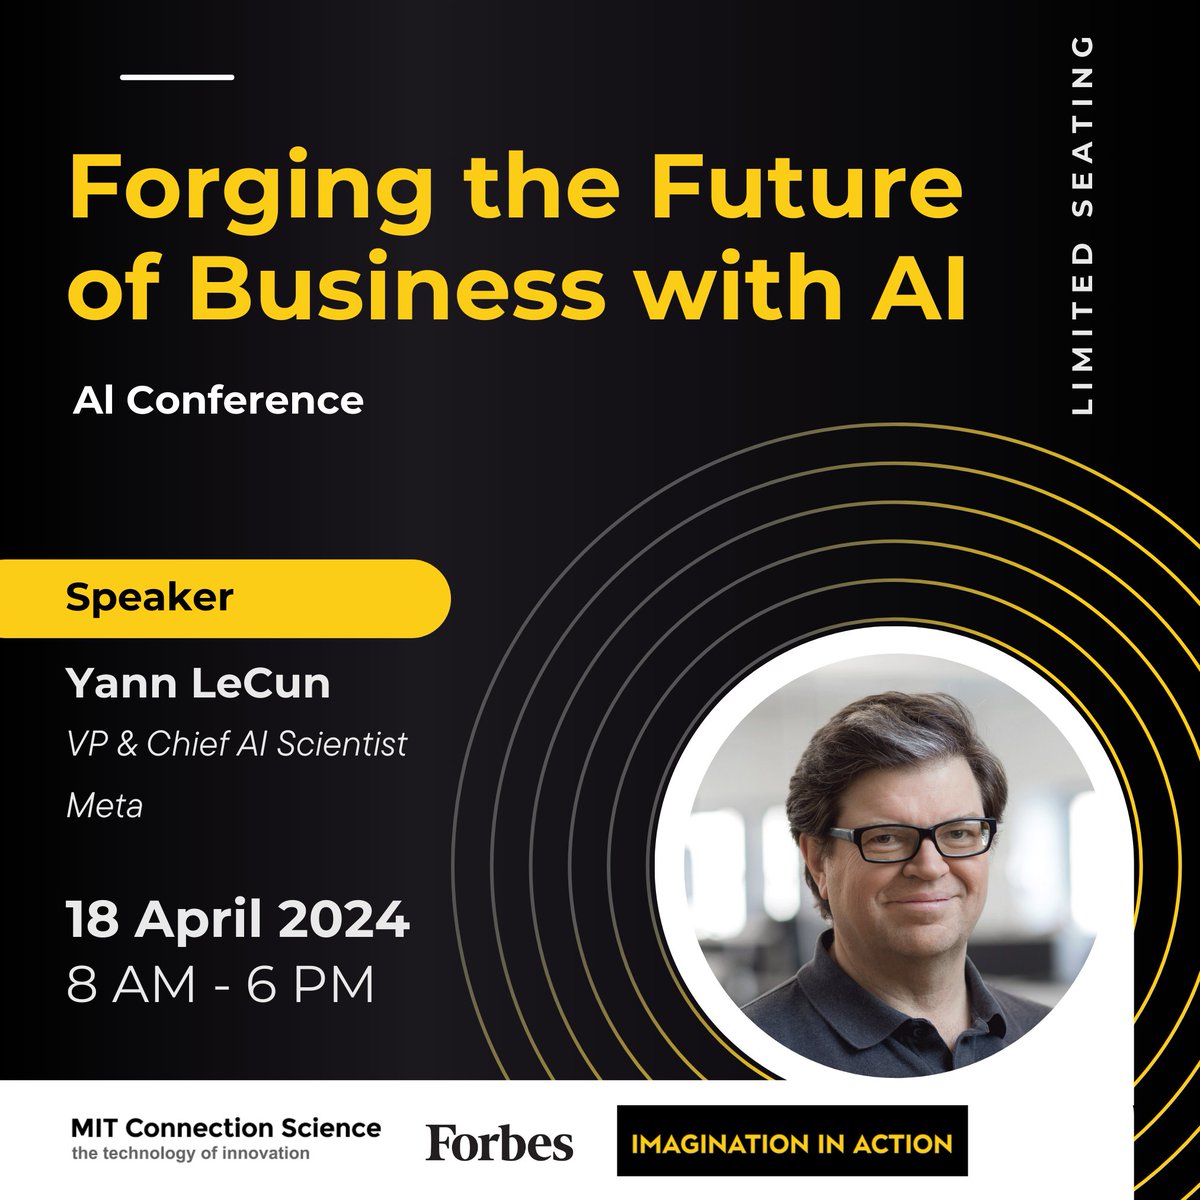 Excited to welcome Yann LeCun, VP & Chief AI Scientist at Meta, as a distinguished speaker at the Imagination in Action Summit at MIT! Join us for visionary insights from one of the leading figures in artificial intelligence research. #MITforge2024